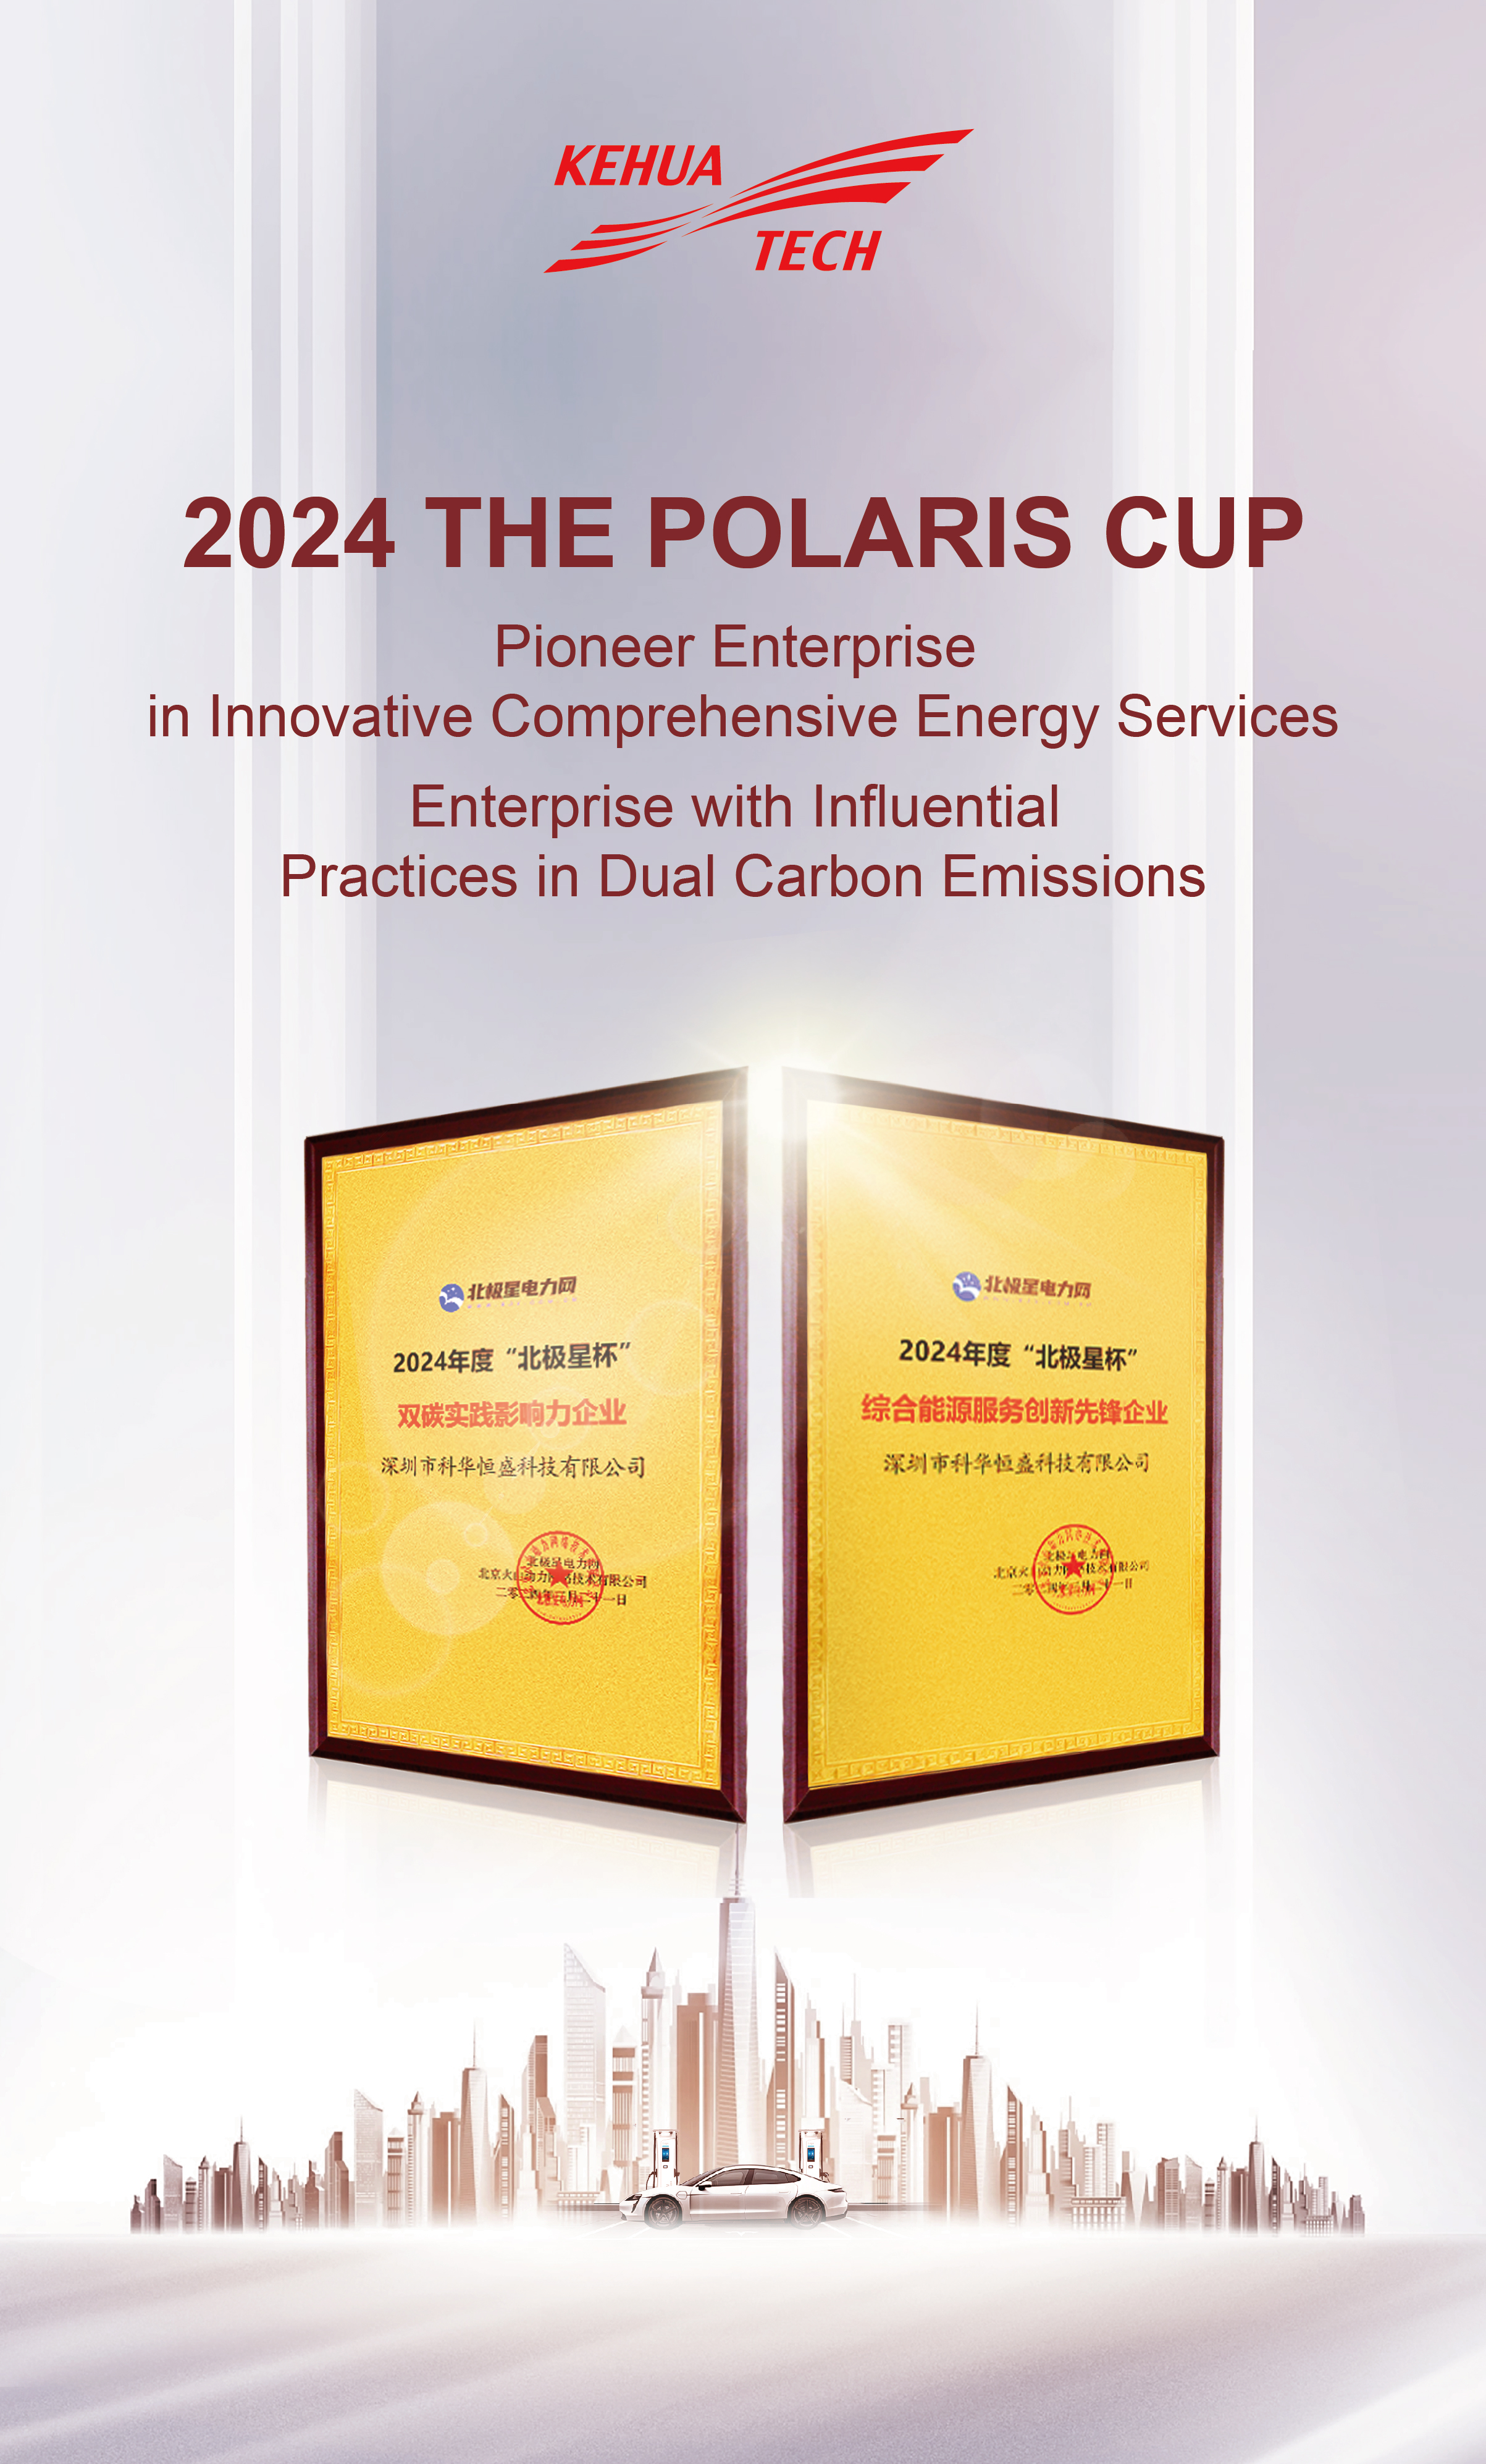 Shenzhen Kehua is honored to receive the 2024 Polaris Cup as the "Pioneer Enterprise in Innovative Comprehensive Energy Services" and the "Enterprise with Influential Practices in Dual Carbon Emissions."